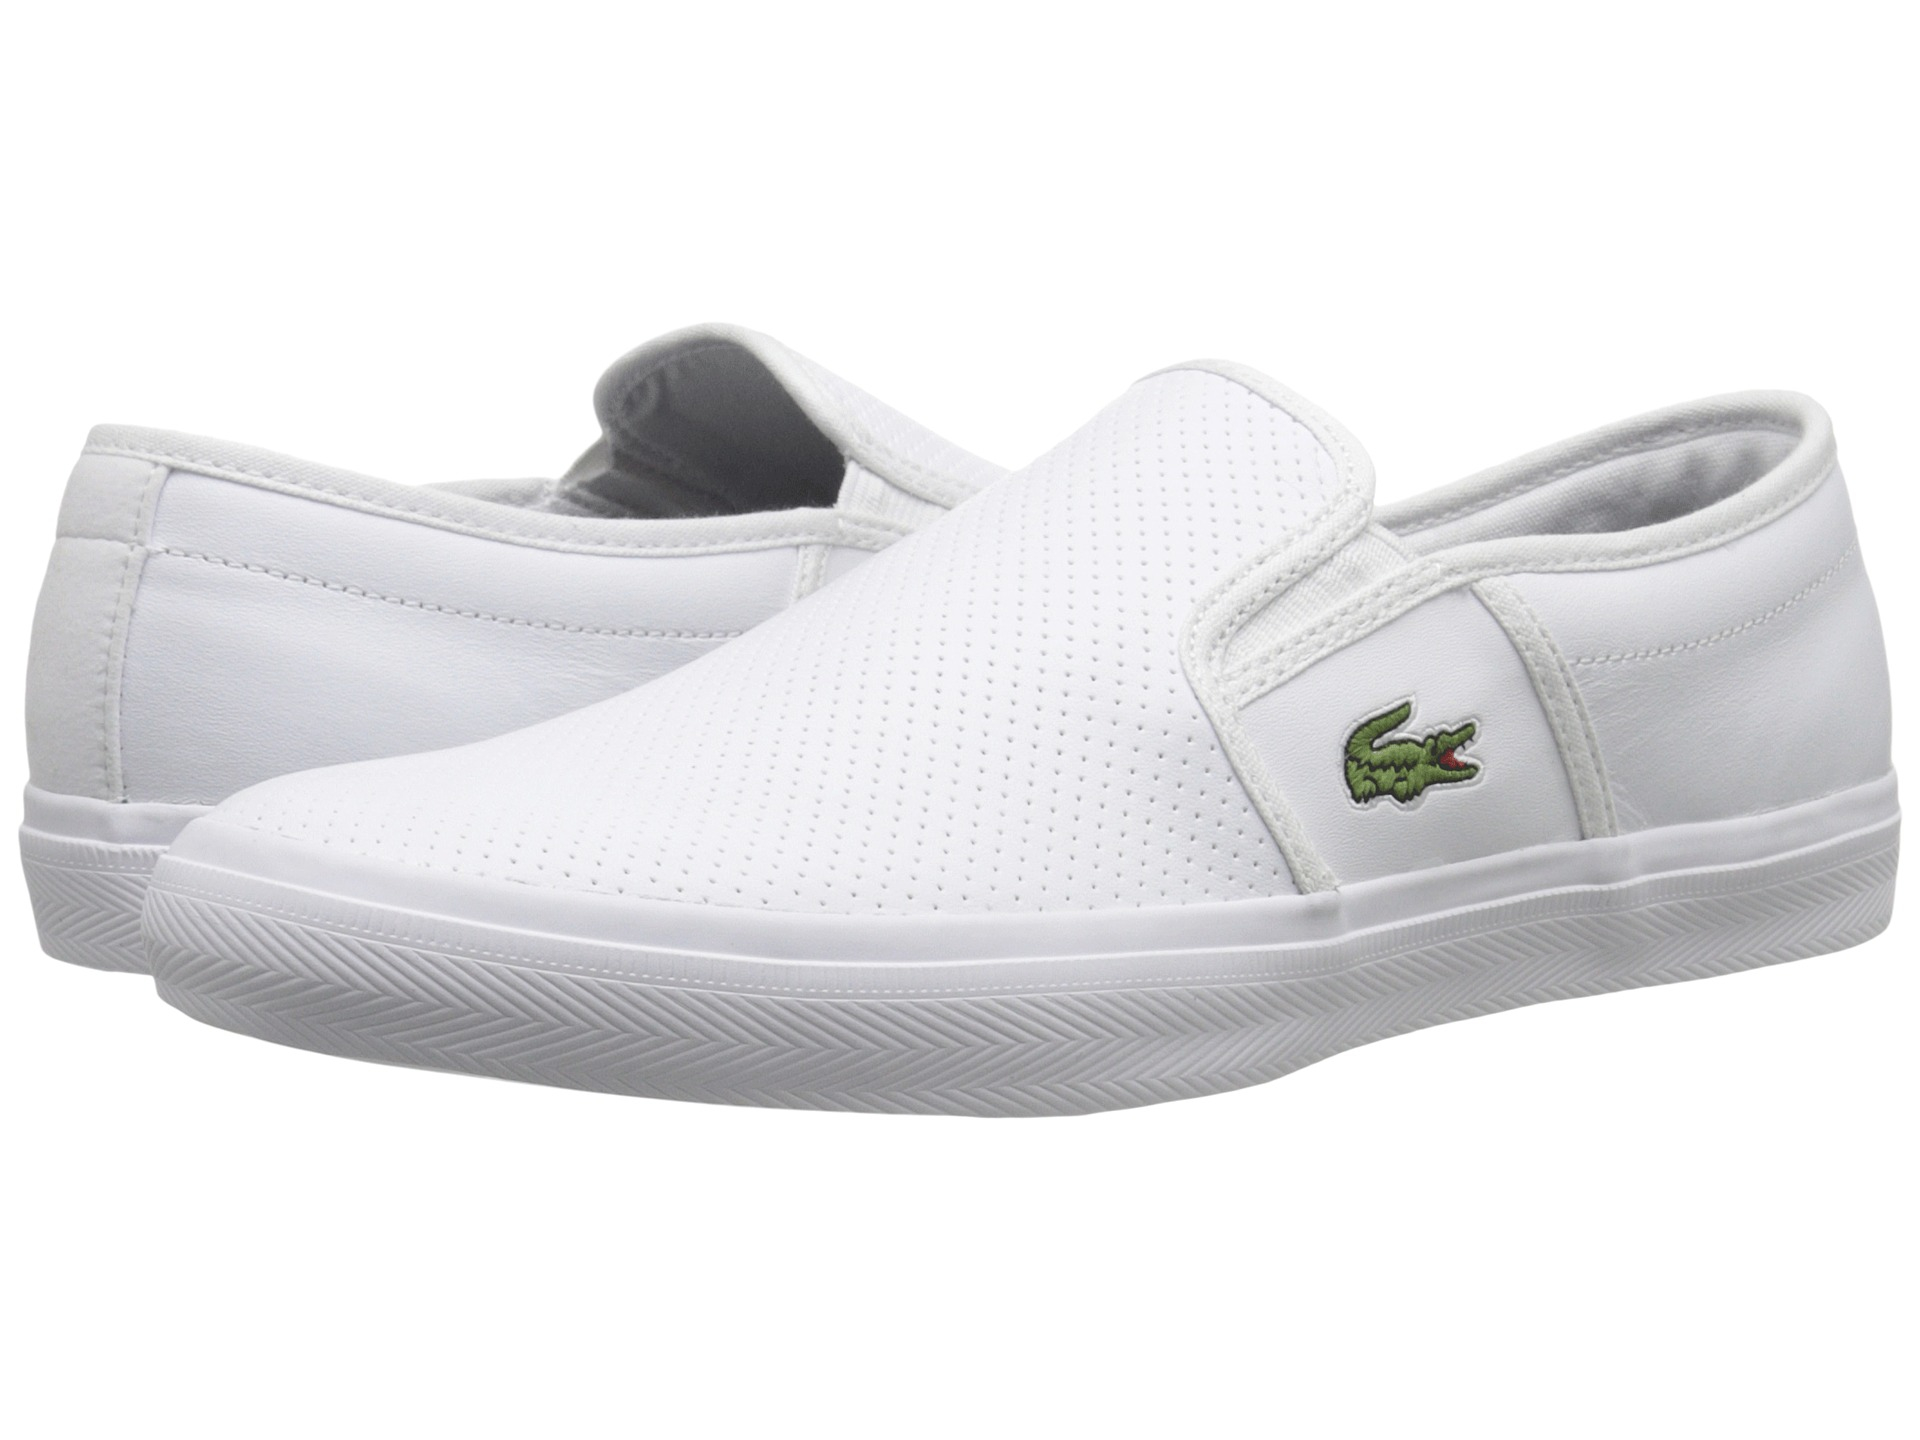 lacoste mens shoes slip on - 61% OFF 